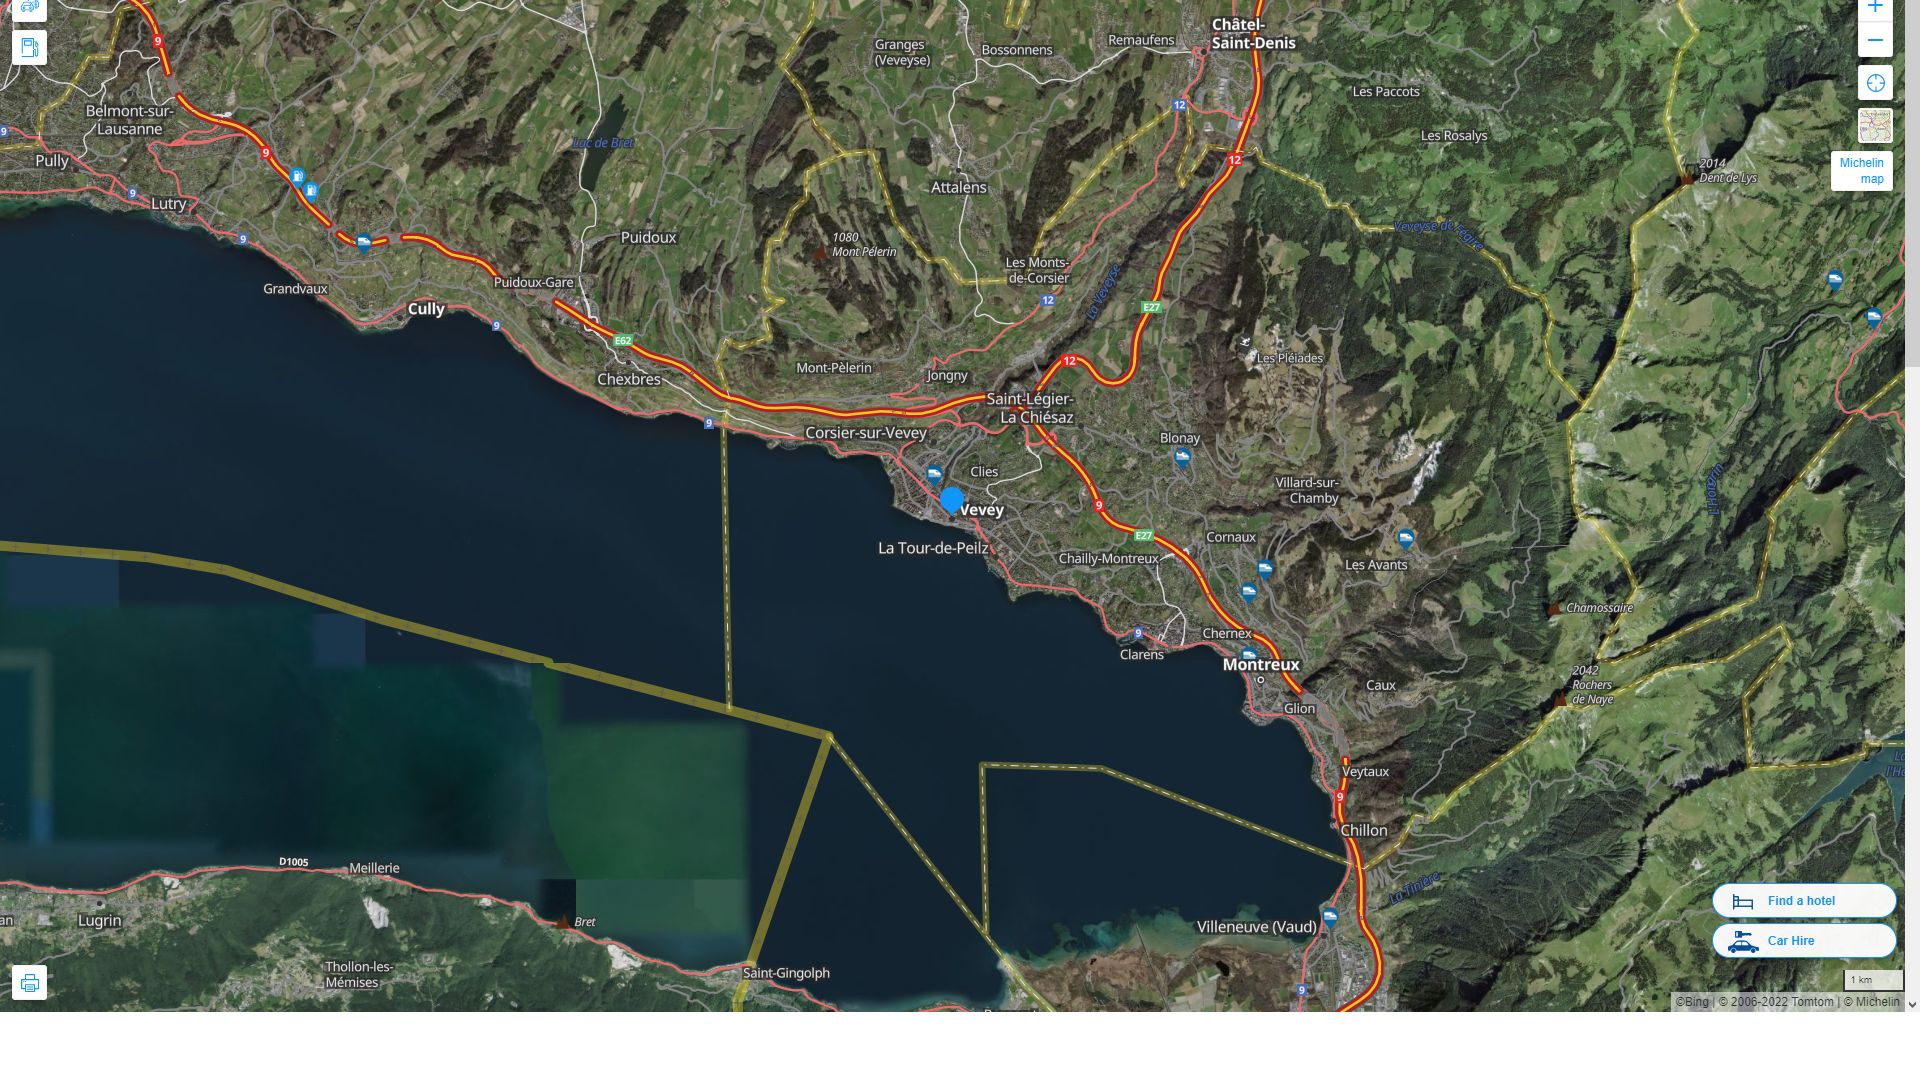 Vevey Highway and Road Map with Satellite View